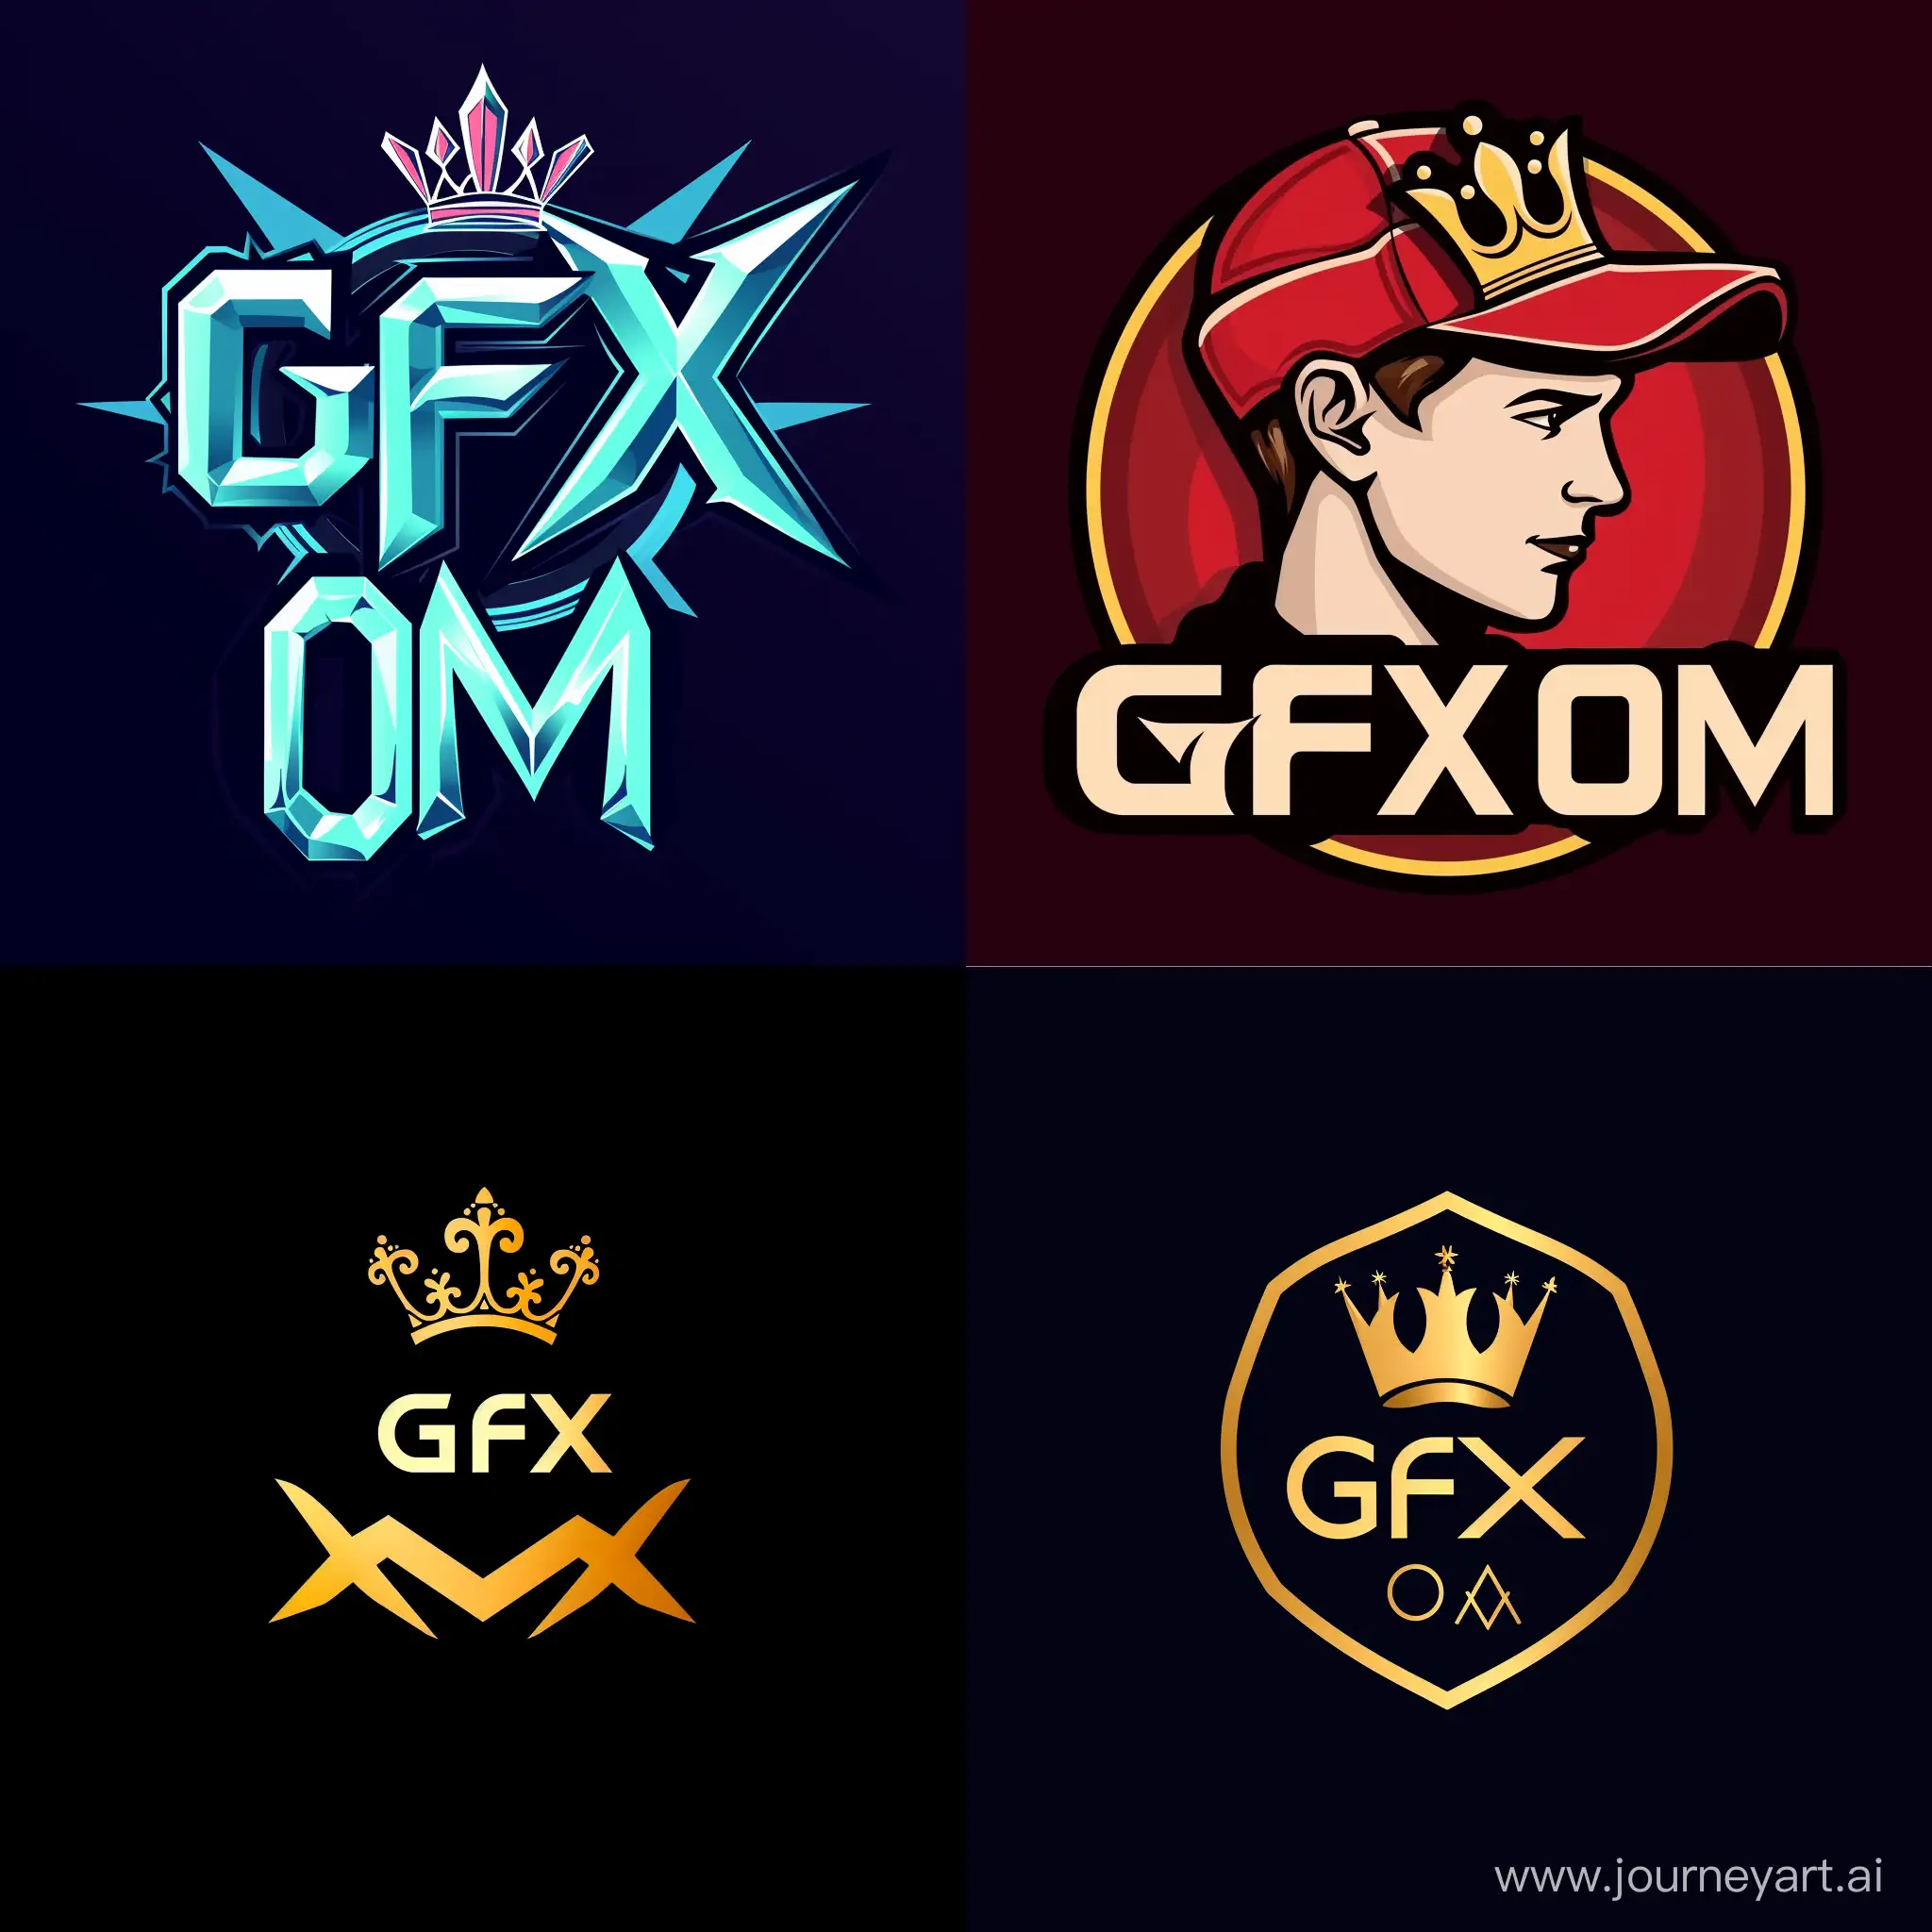 make a beautifull logo for name "  Gfx OM " angle boy , added crown shape in logo